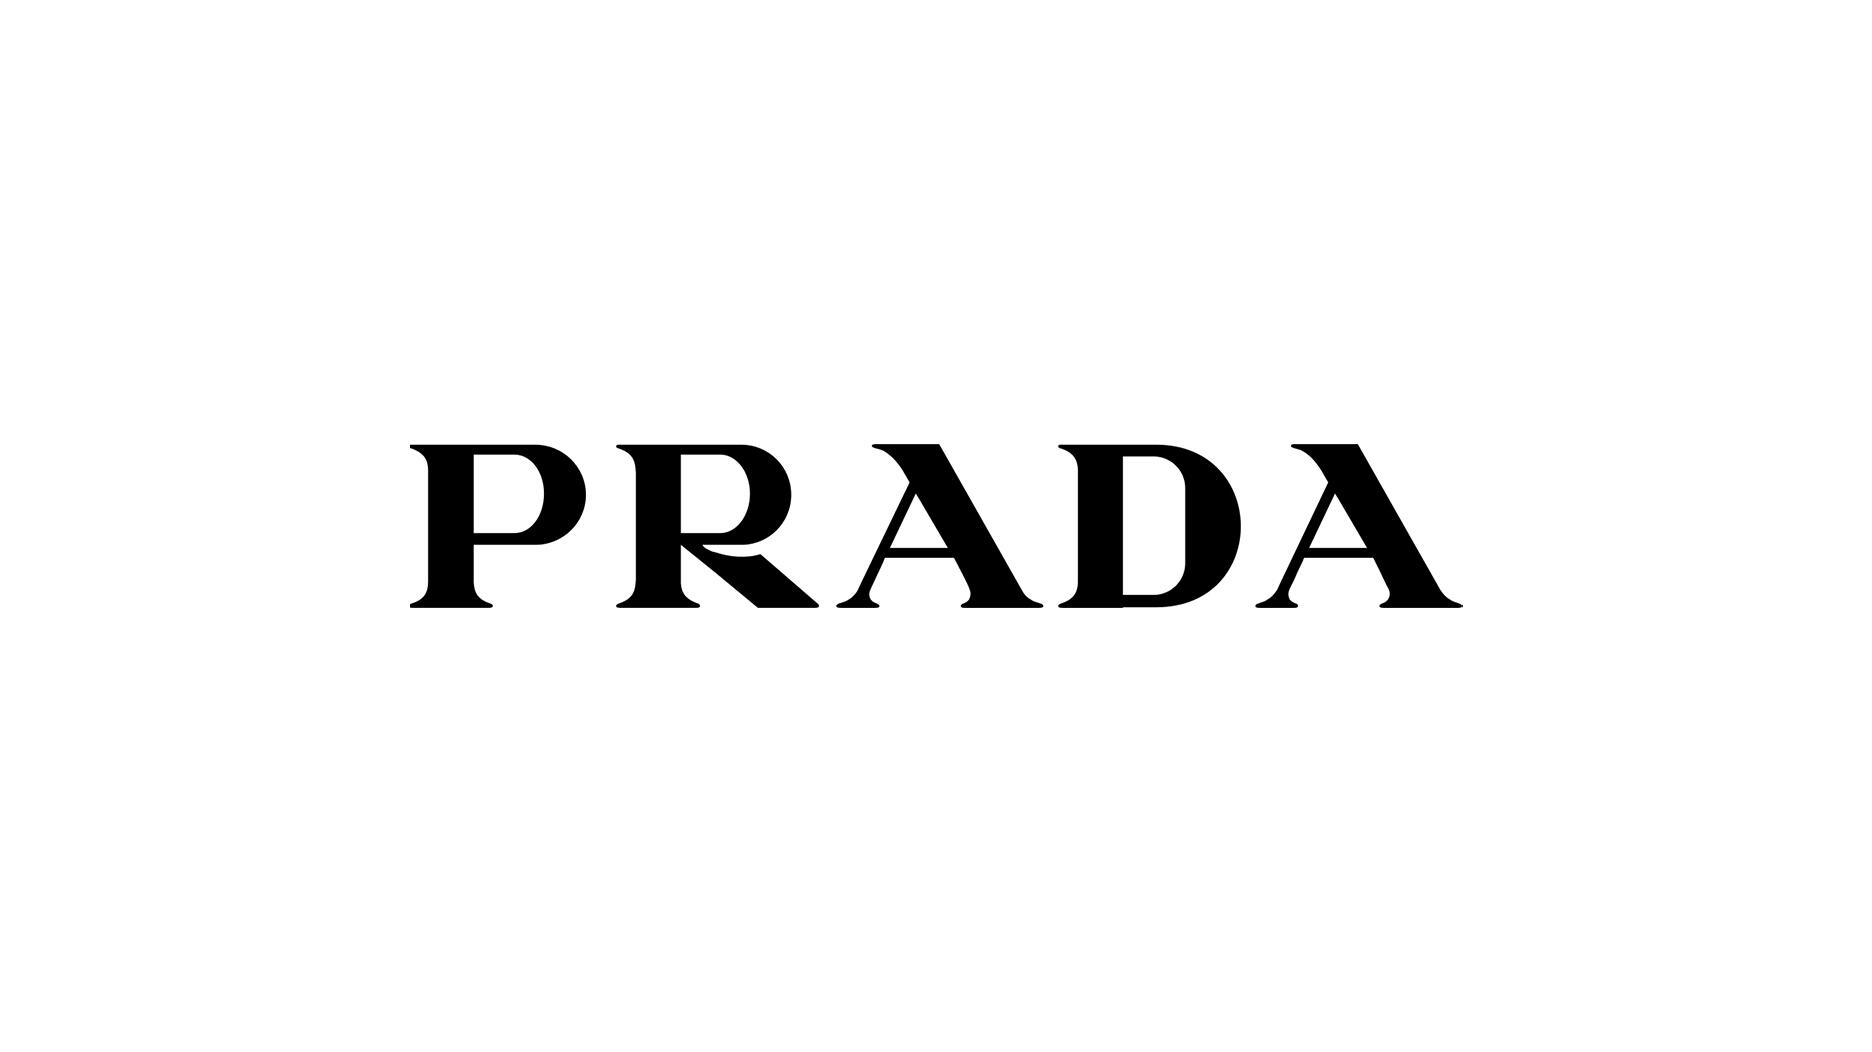 You can pay for your next big shop with this new Prada bracelet